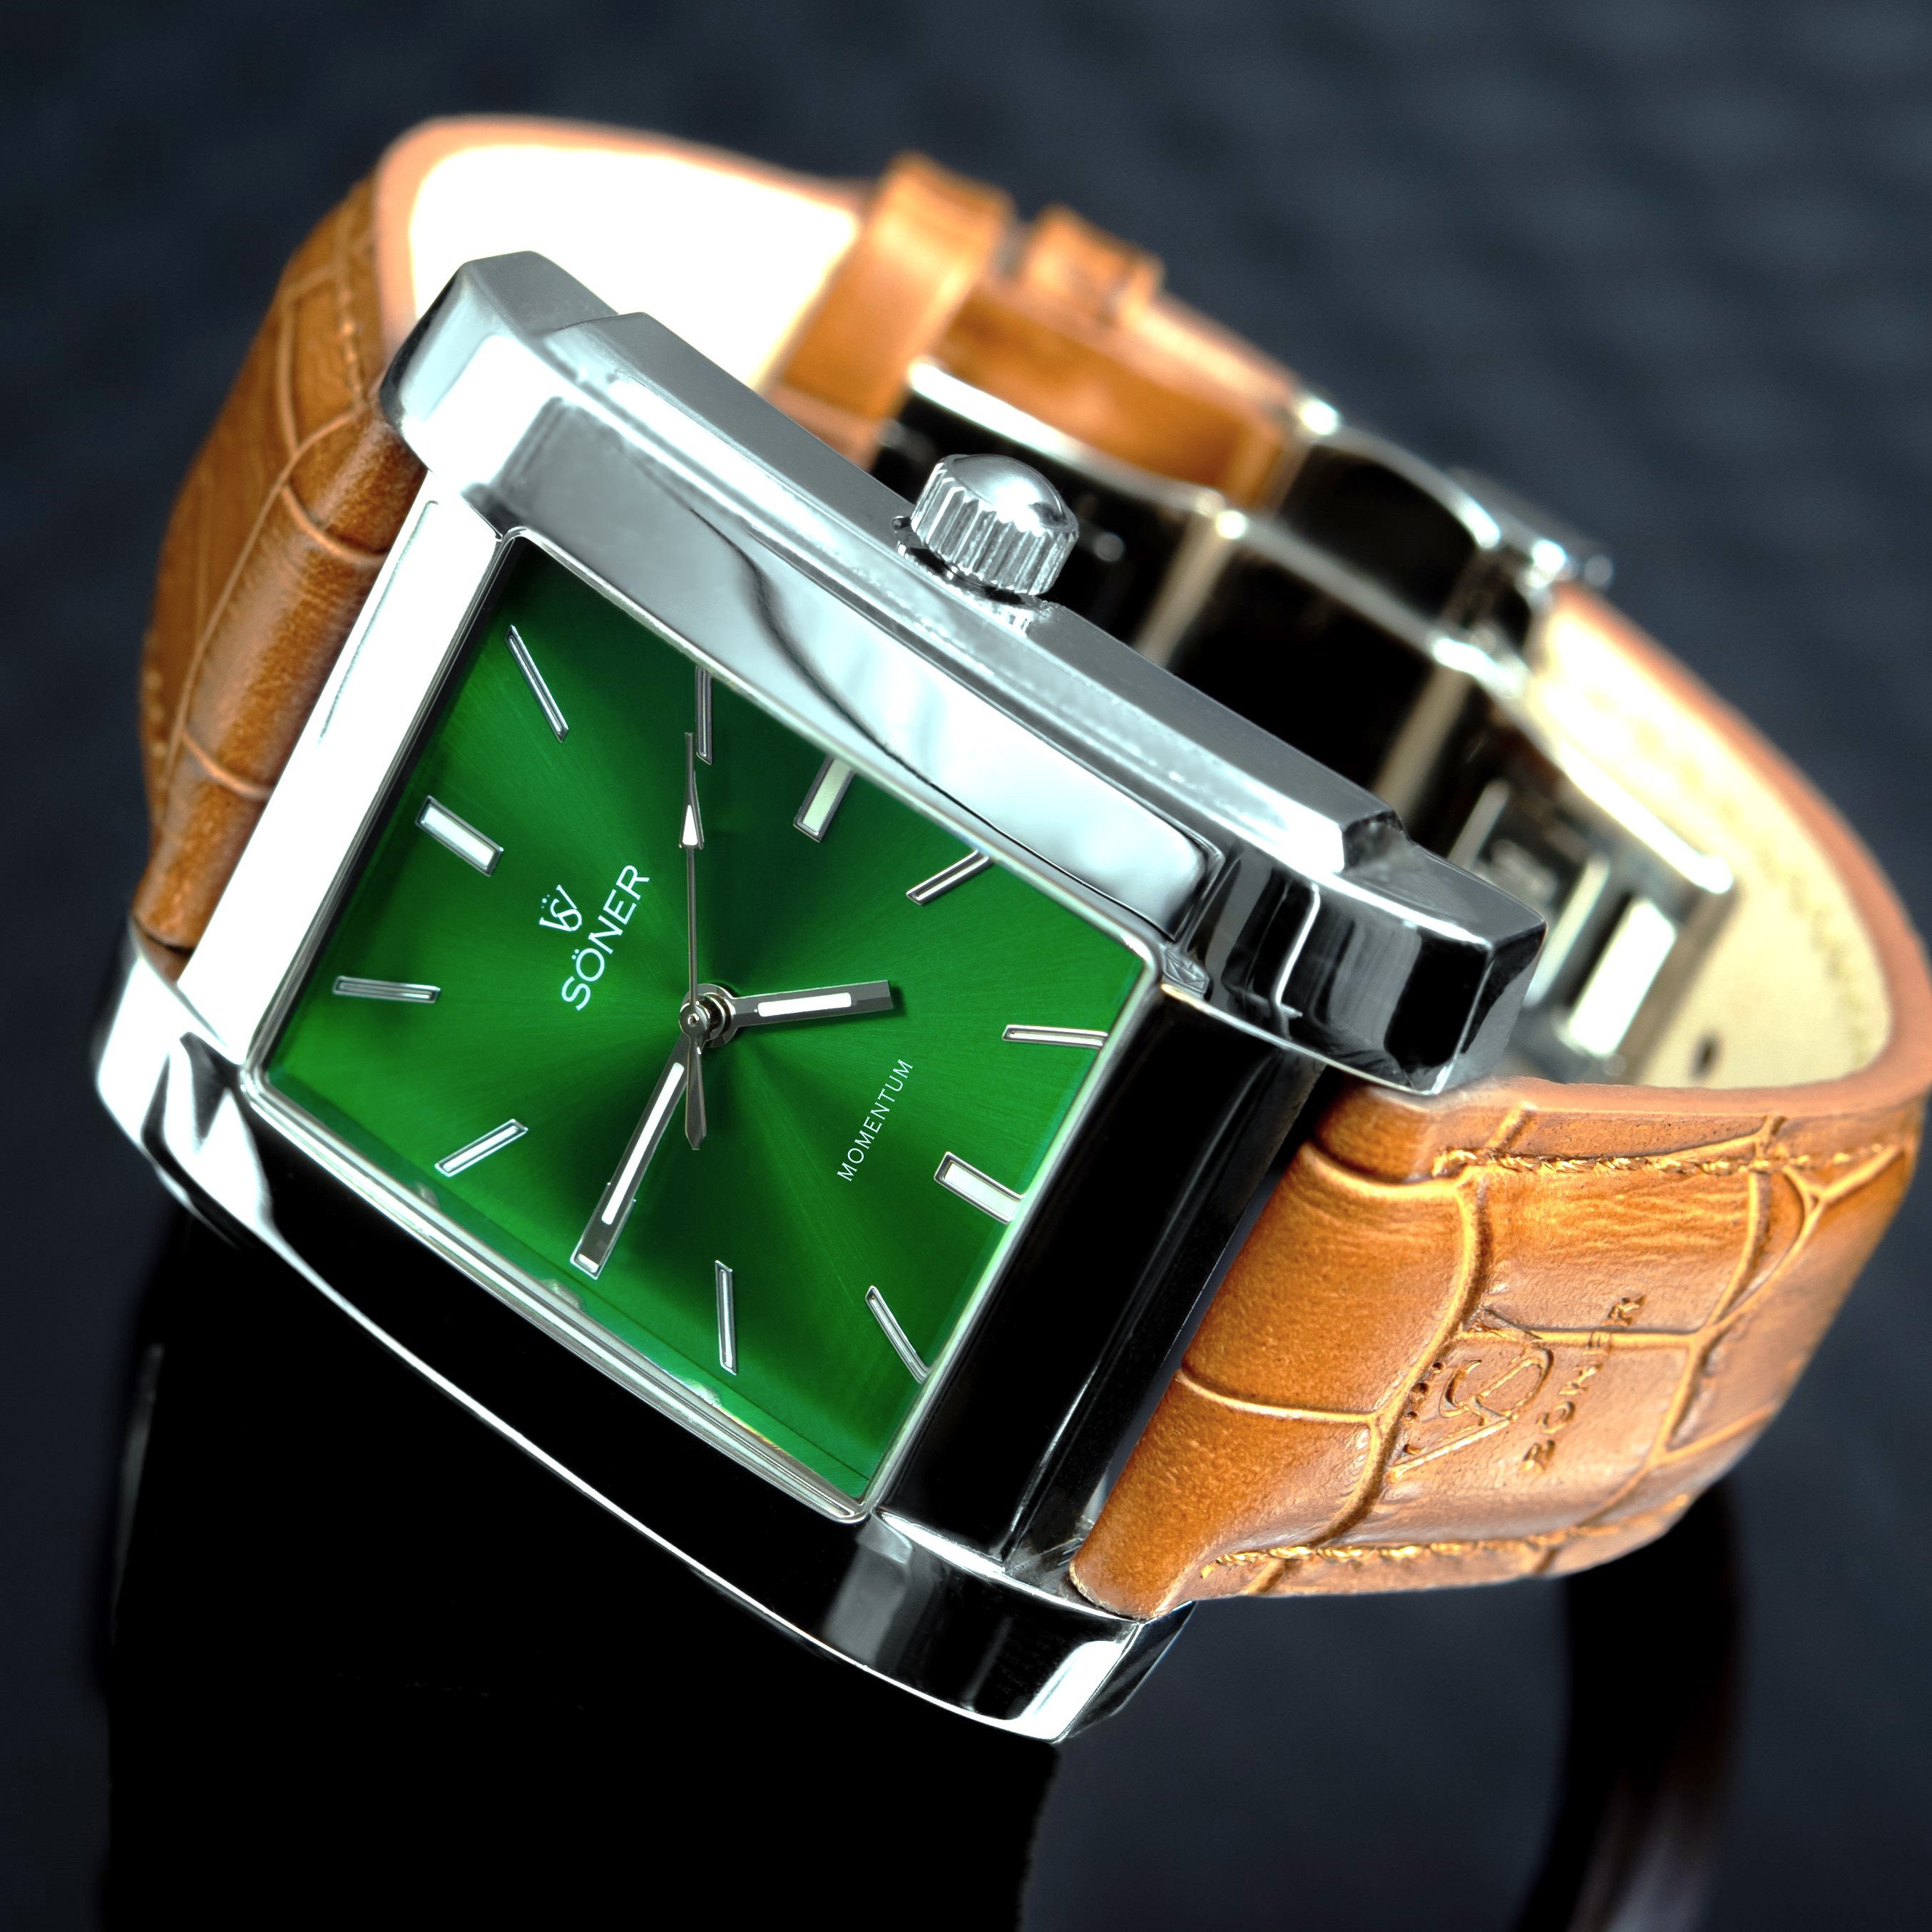 Man Square Watch in Stainless Steel With Green Dial Tank Quartz